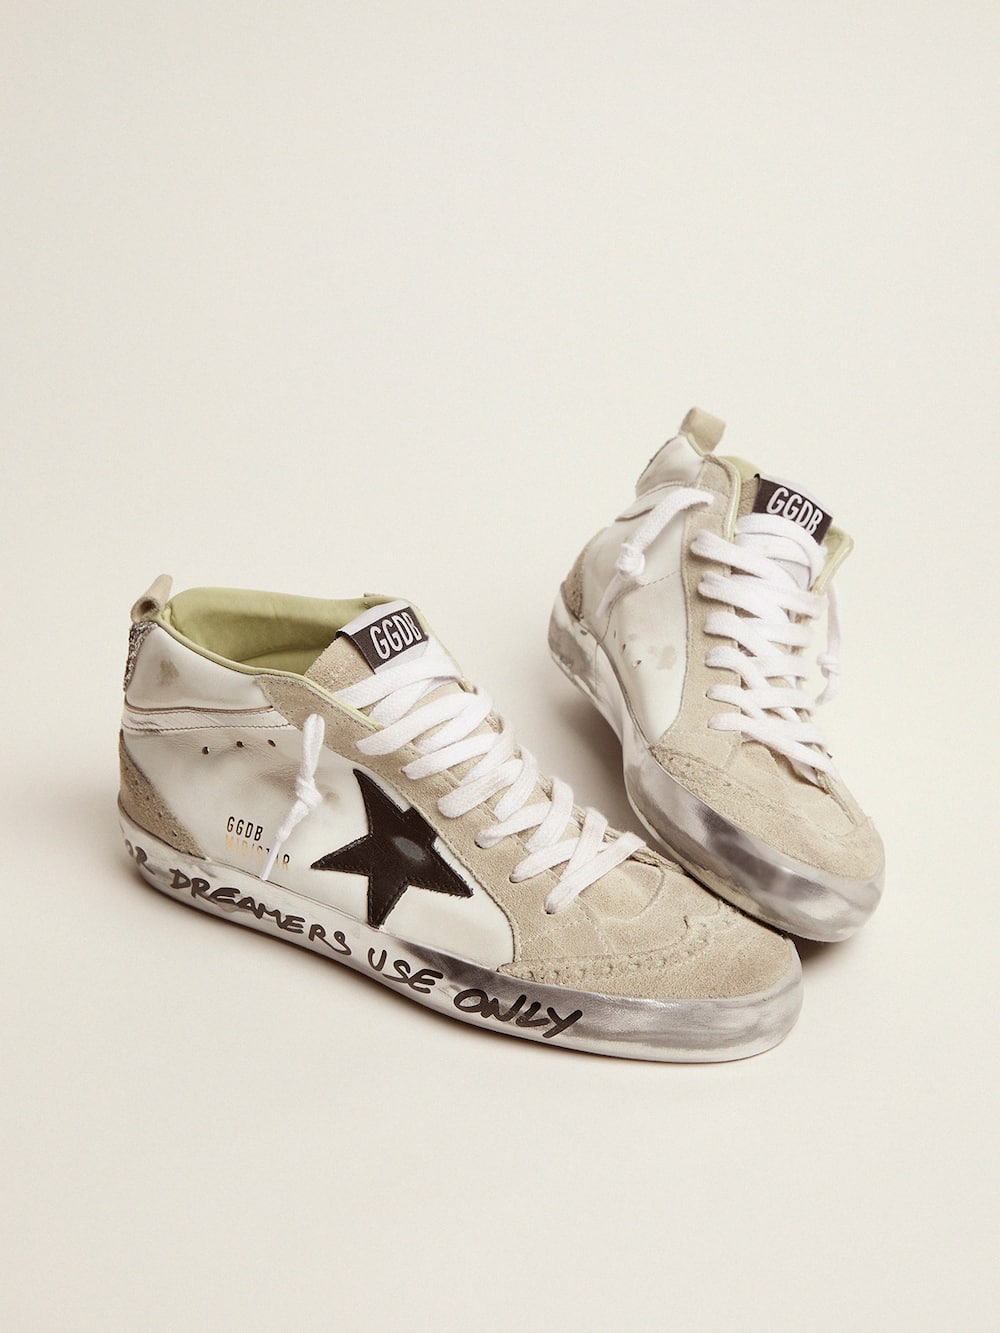 Golden Goose - Mid Star LTD sneakers with glitter heel tab and handwritten lettering on the foxing in 